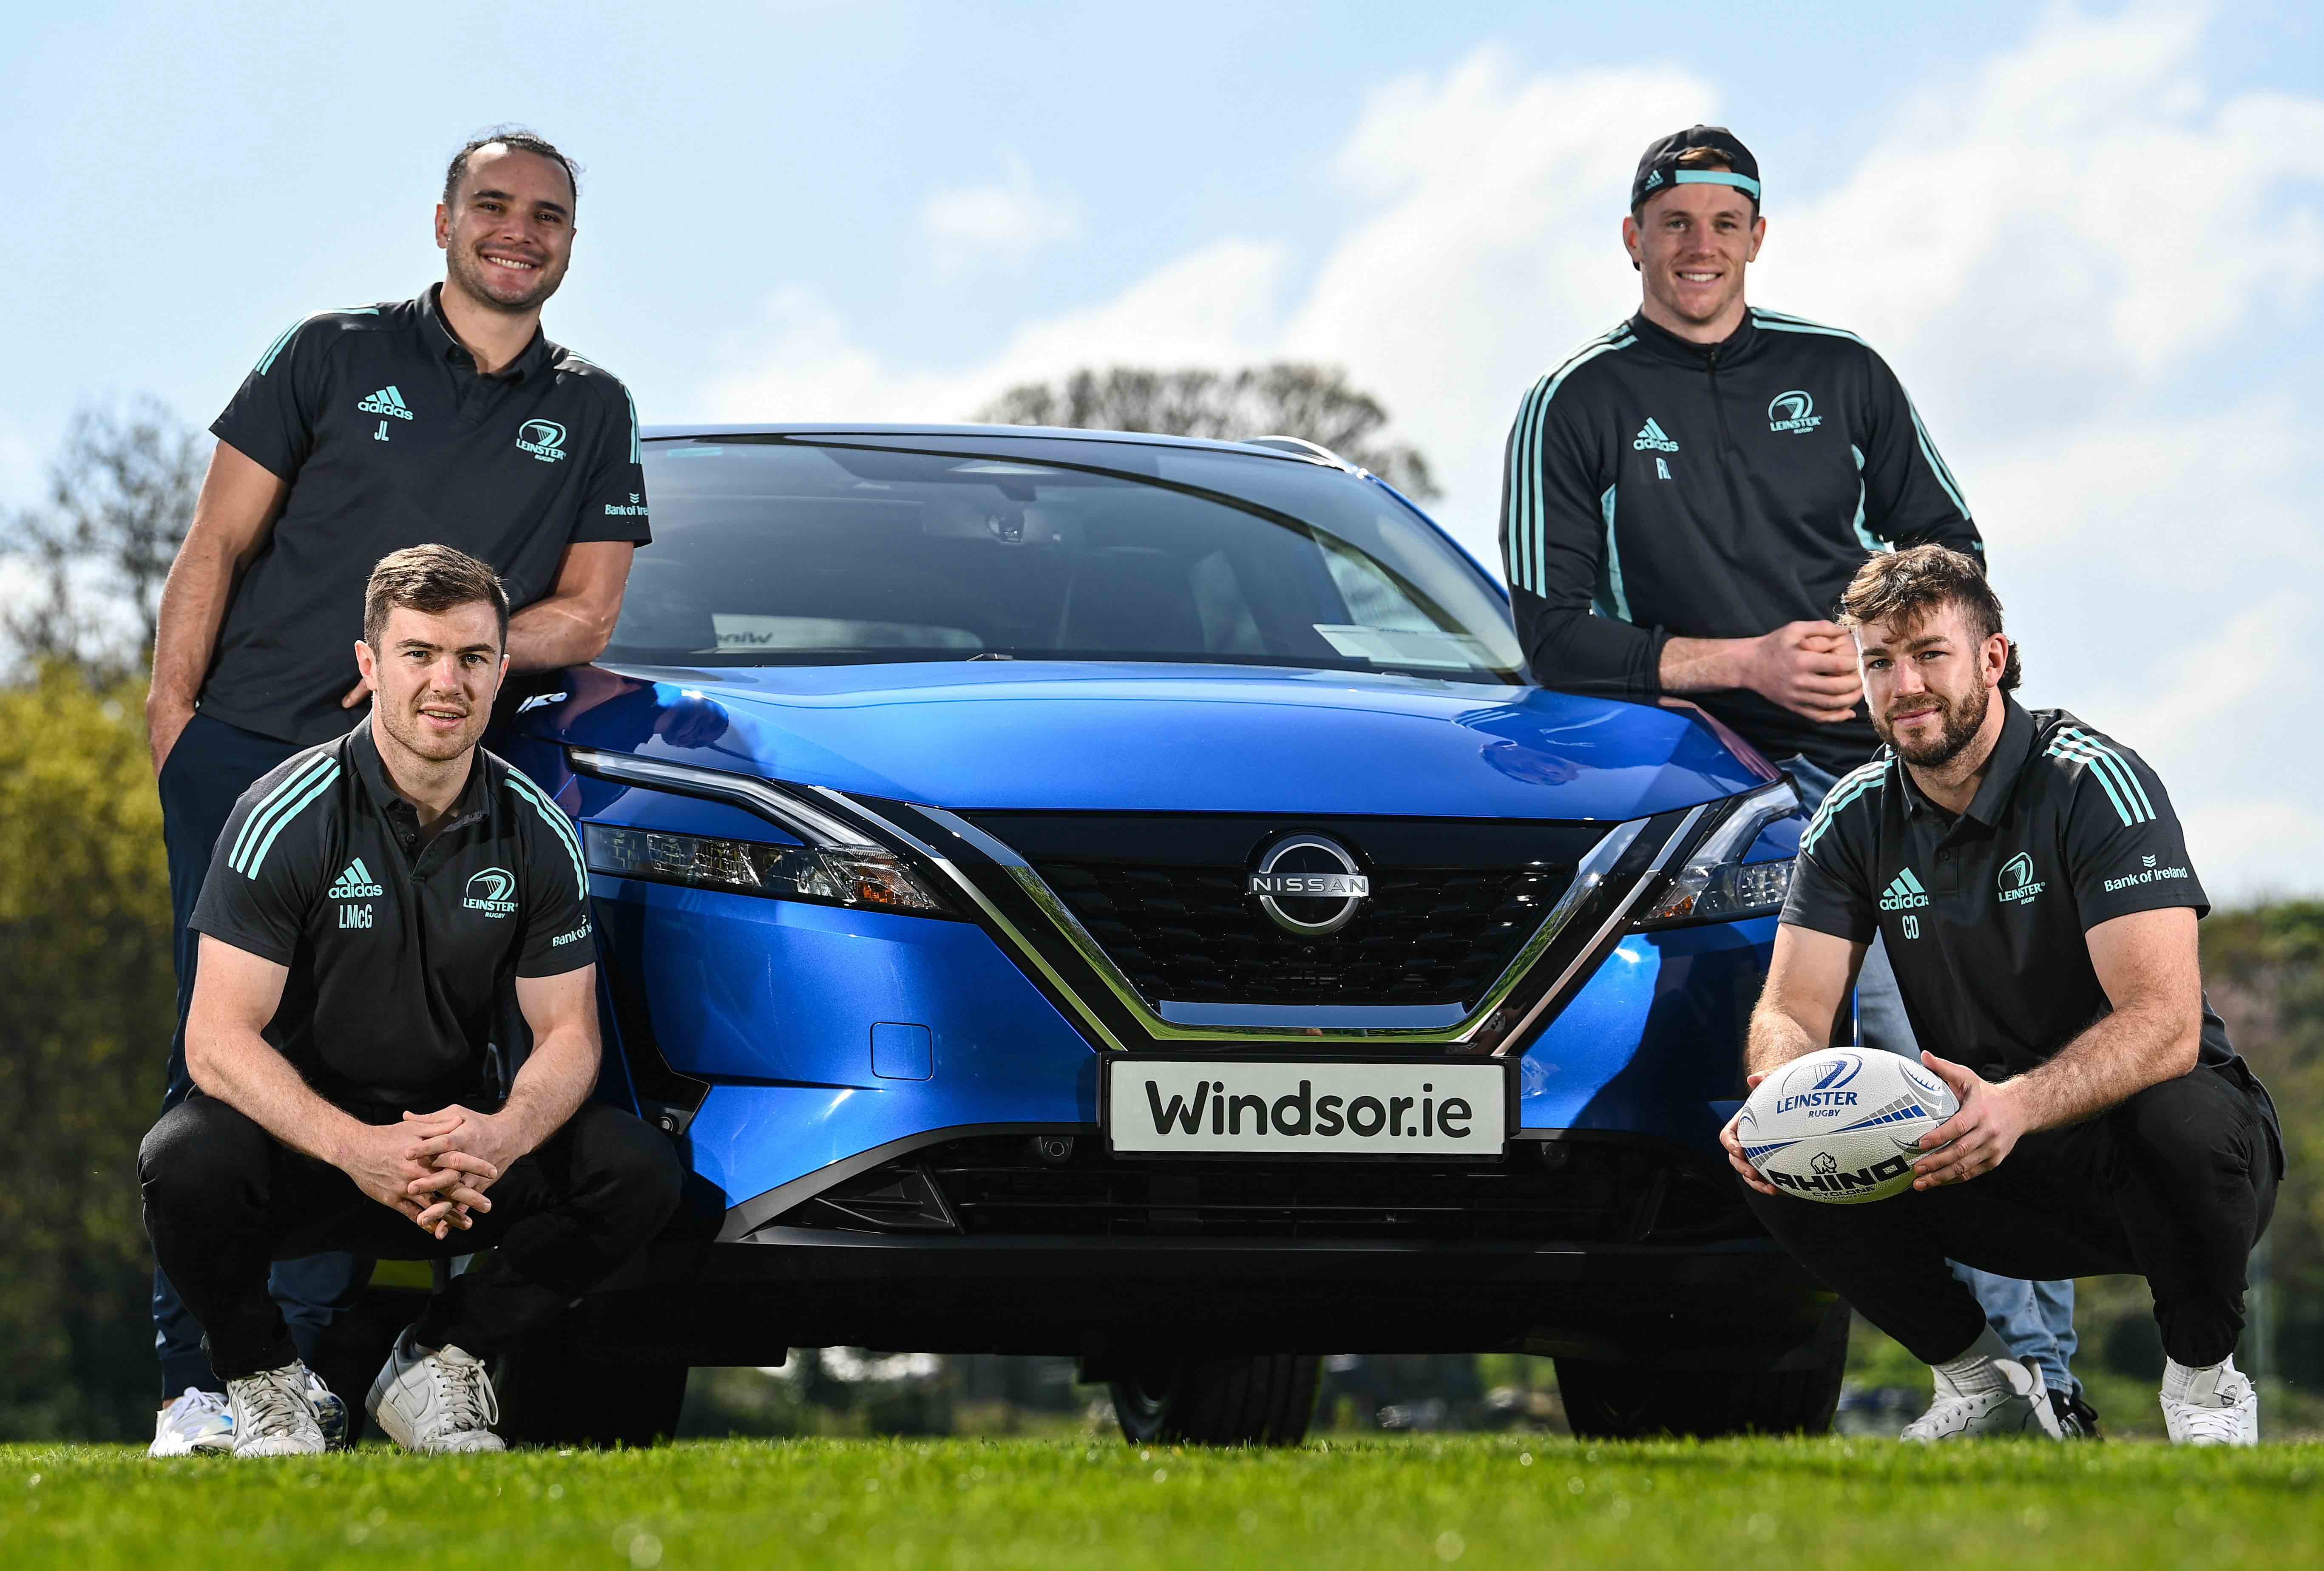 Windor motors have extended their sponsorship of the Leinster Rugby team